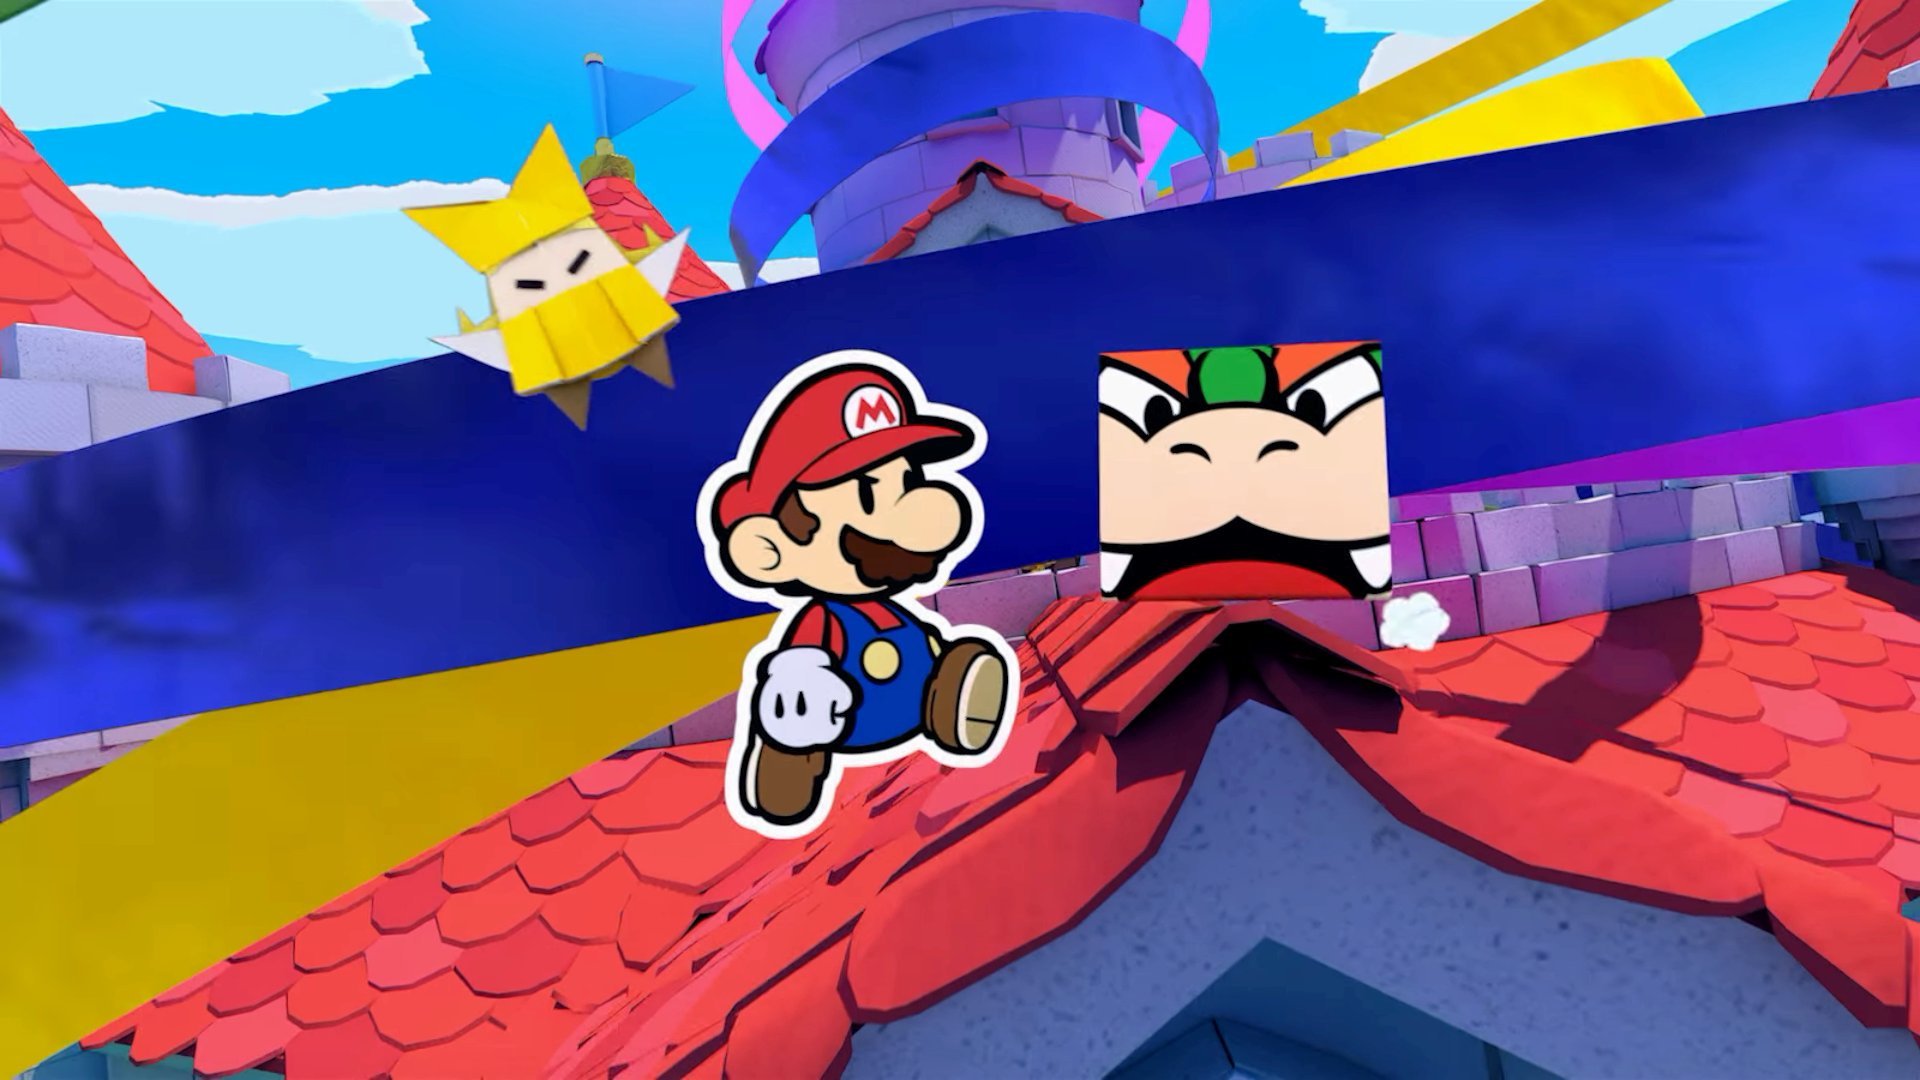 Paper Mario's Switch Reveal Adds More Weight To 64, Sunshine, Galaxy Remaster Reports Nintendo